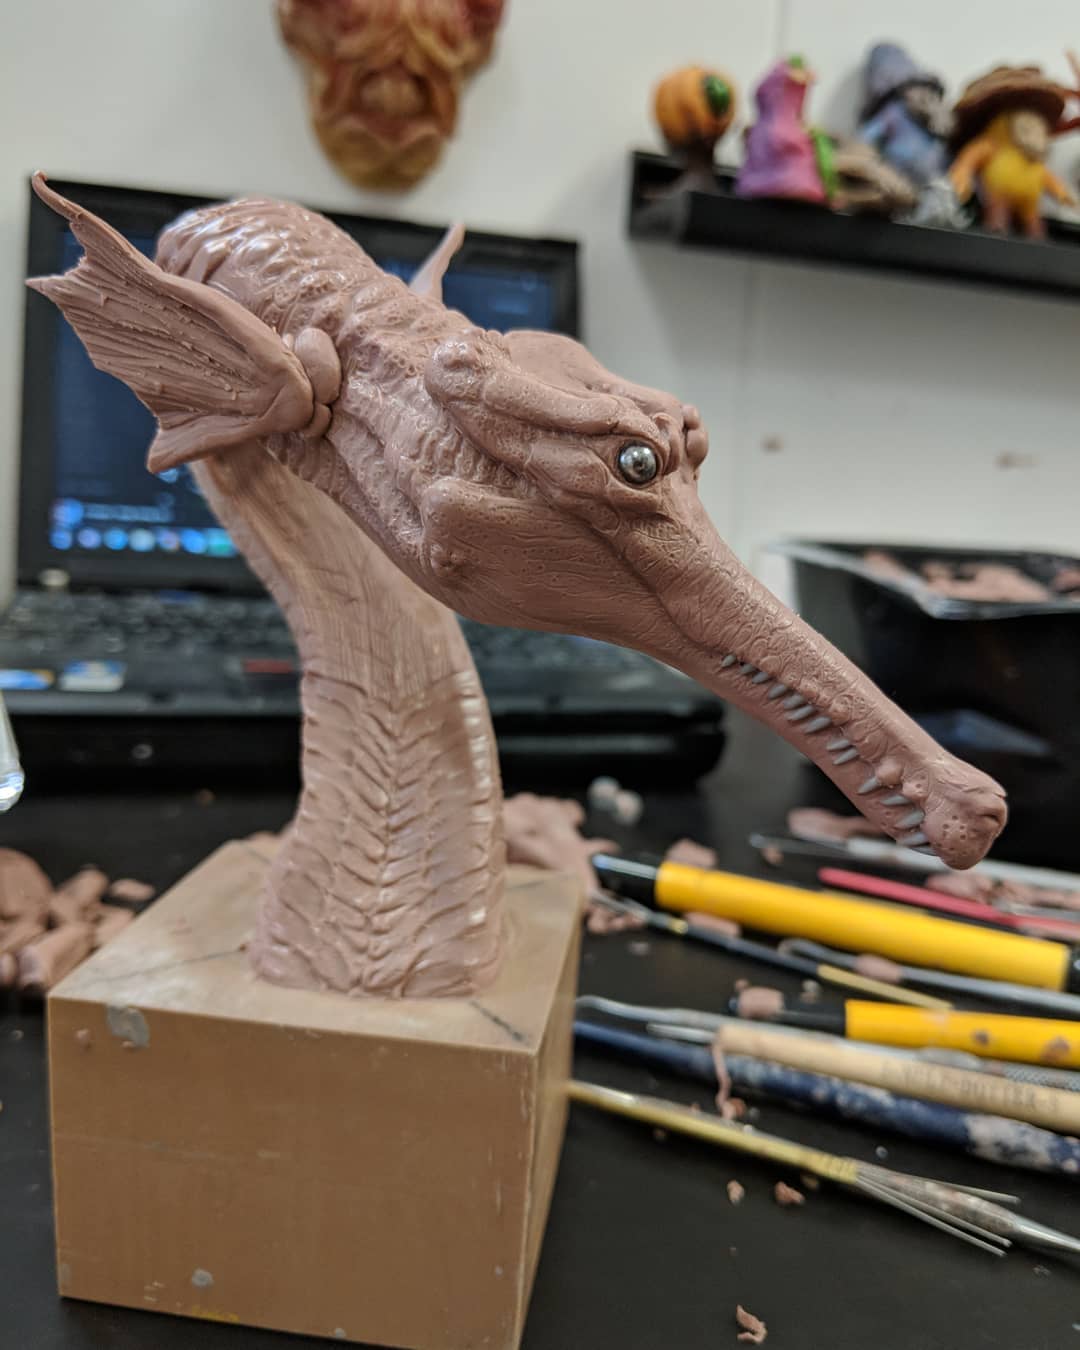 Monster Clay on X: Monster Clay Sculpt of the Day 01/01/19 📷 :  @Monsterpappa #art #characterdesign #clay #claysculpture #ilovemonsterclay  #mcsotd #monster #monsterart #monsterclay #monstermakers # oilbasedclay  #oilclay #sculpting #sculptoftheday